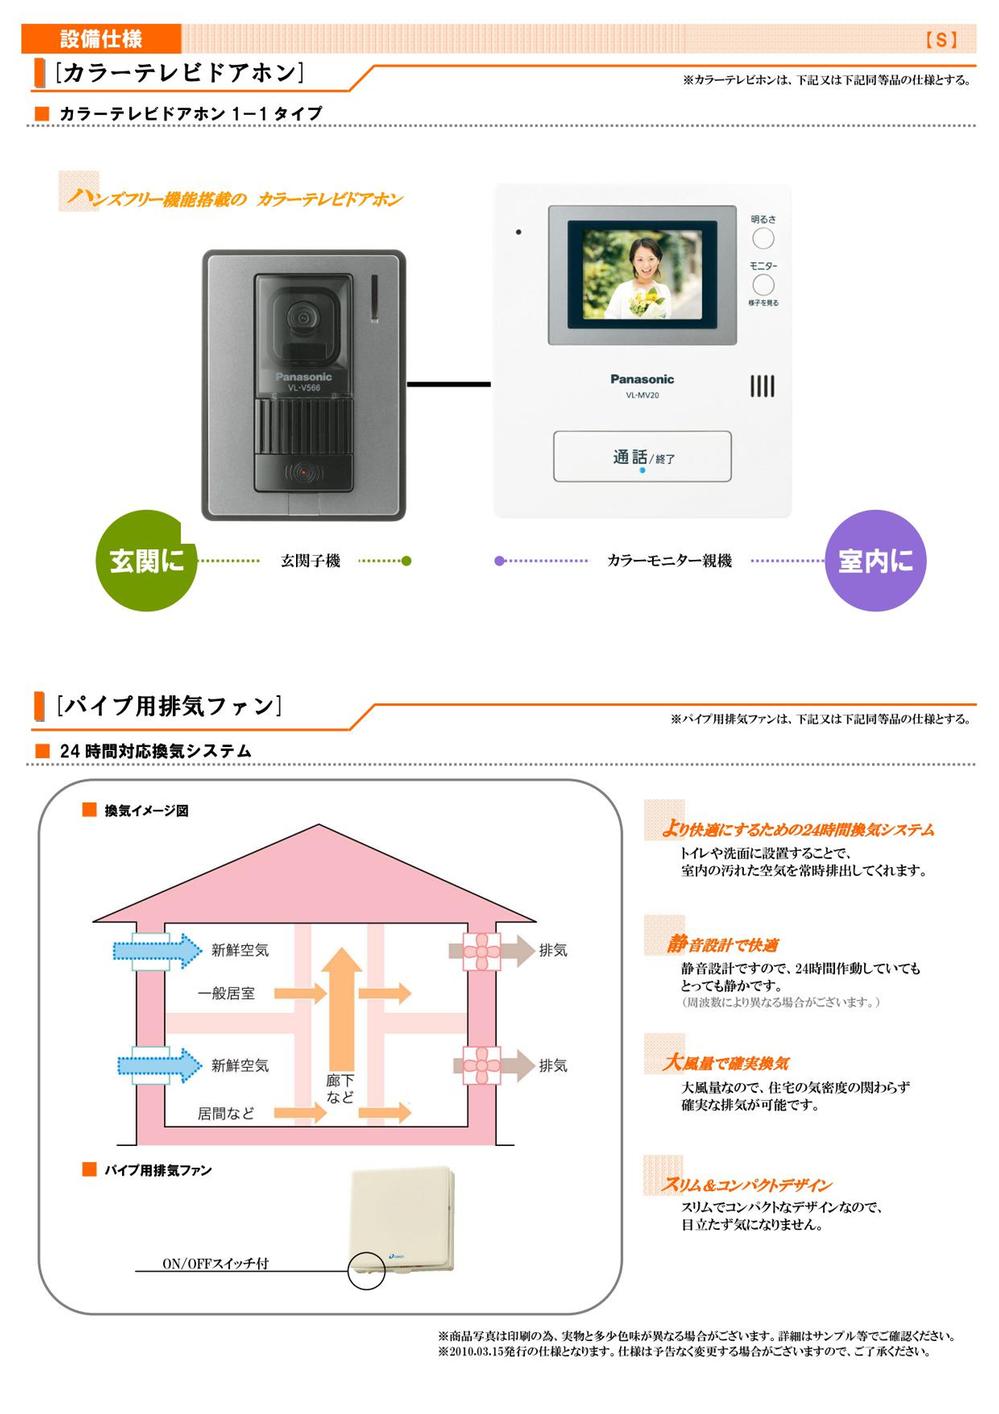 Construction ・ Construction method ・ specification. Building specifications brochure image